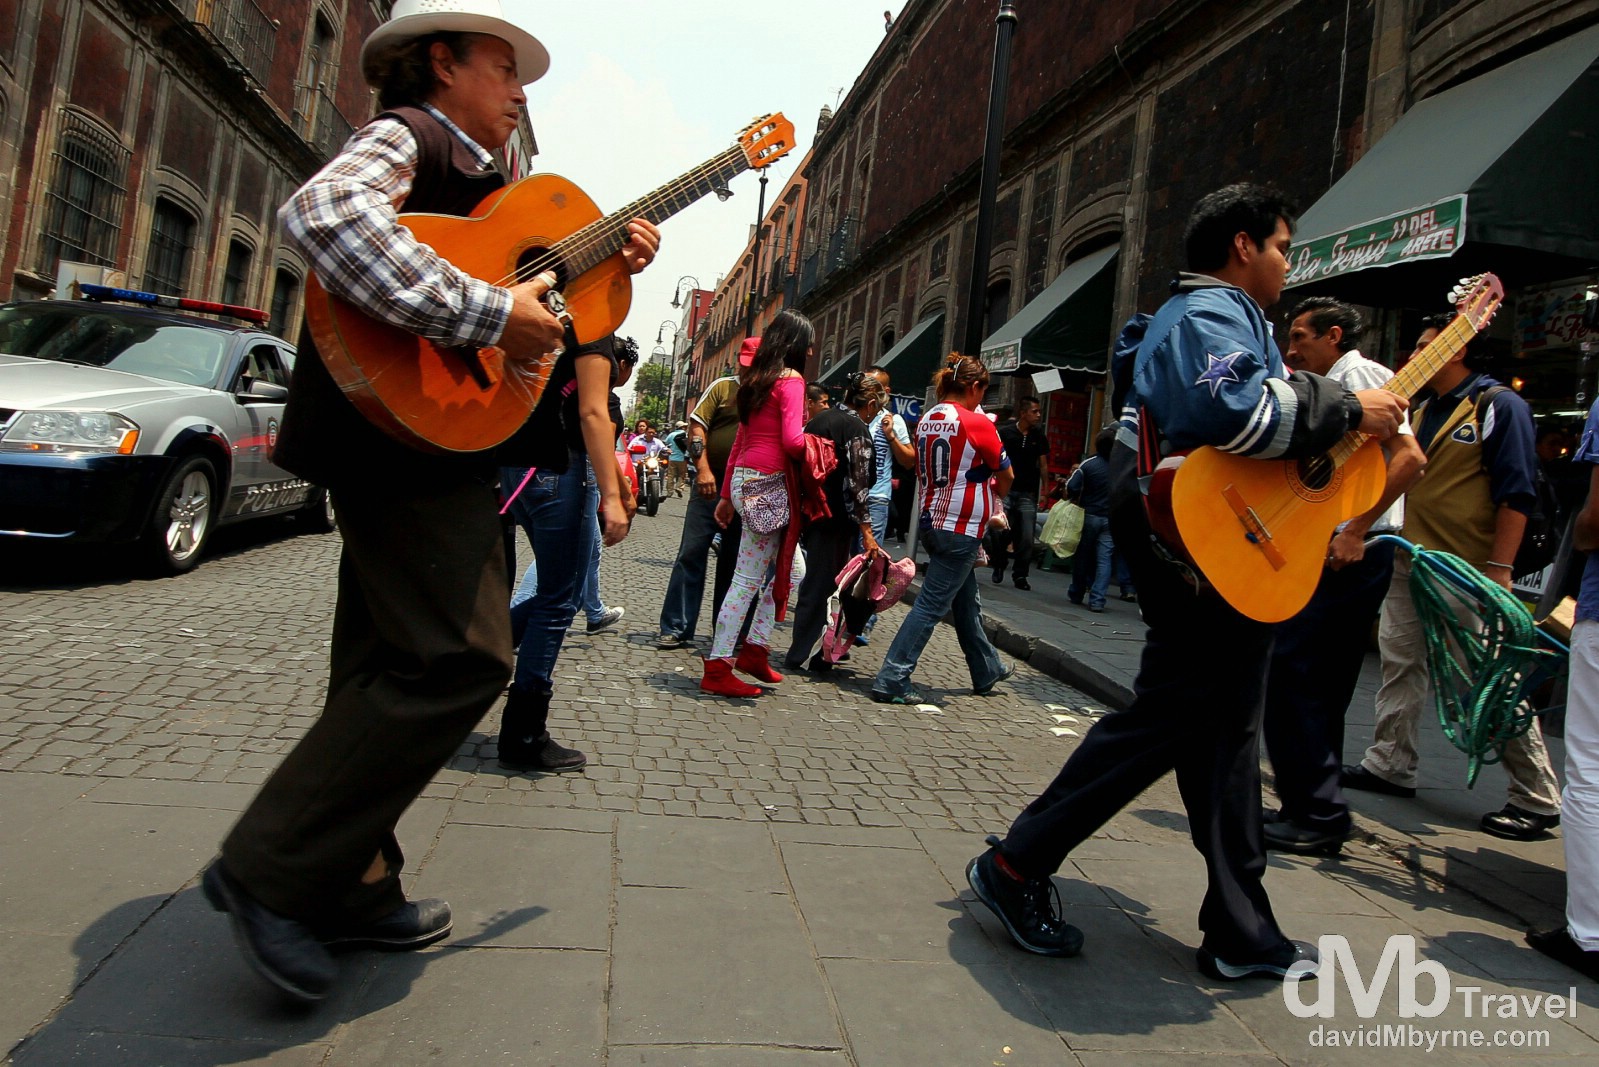 It seems like Mexico moves to the rhythm of a beat. Music is everywhere in the country - one the streets, on public transport & blaring from doorways & moving cars. Moneda, Central Mexico City. April 26th 2013.